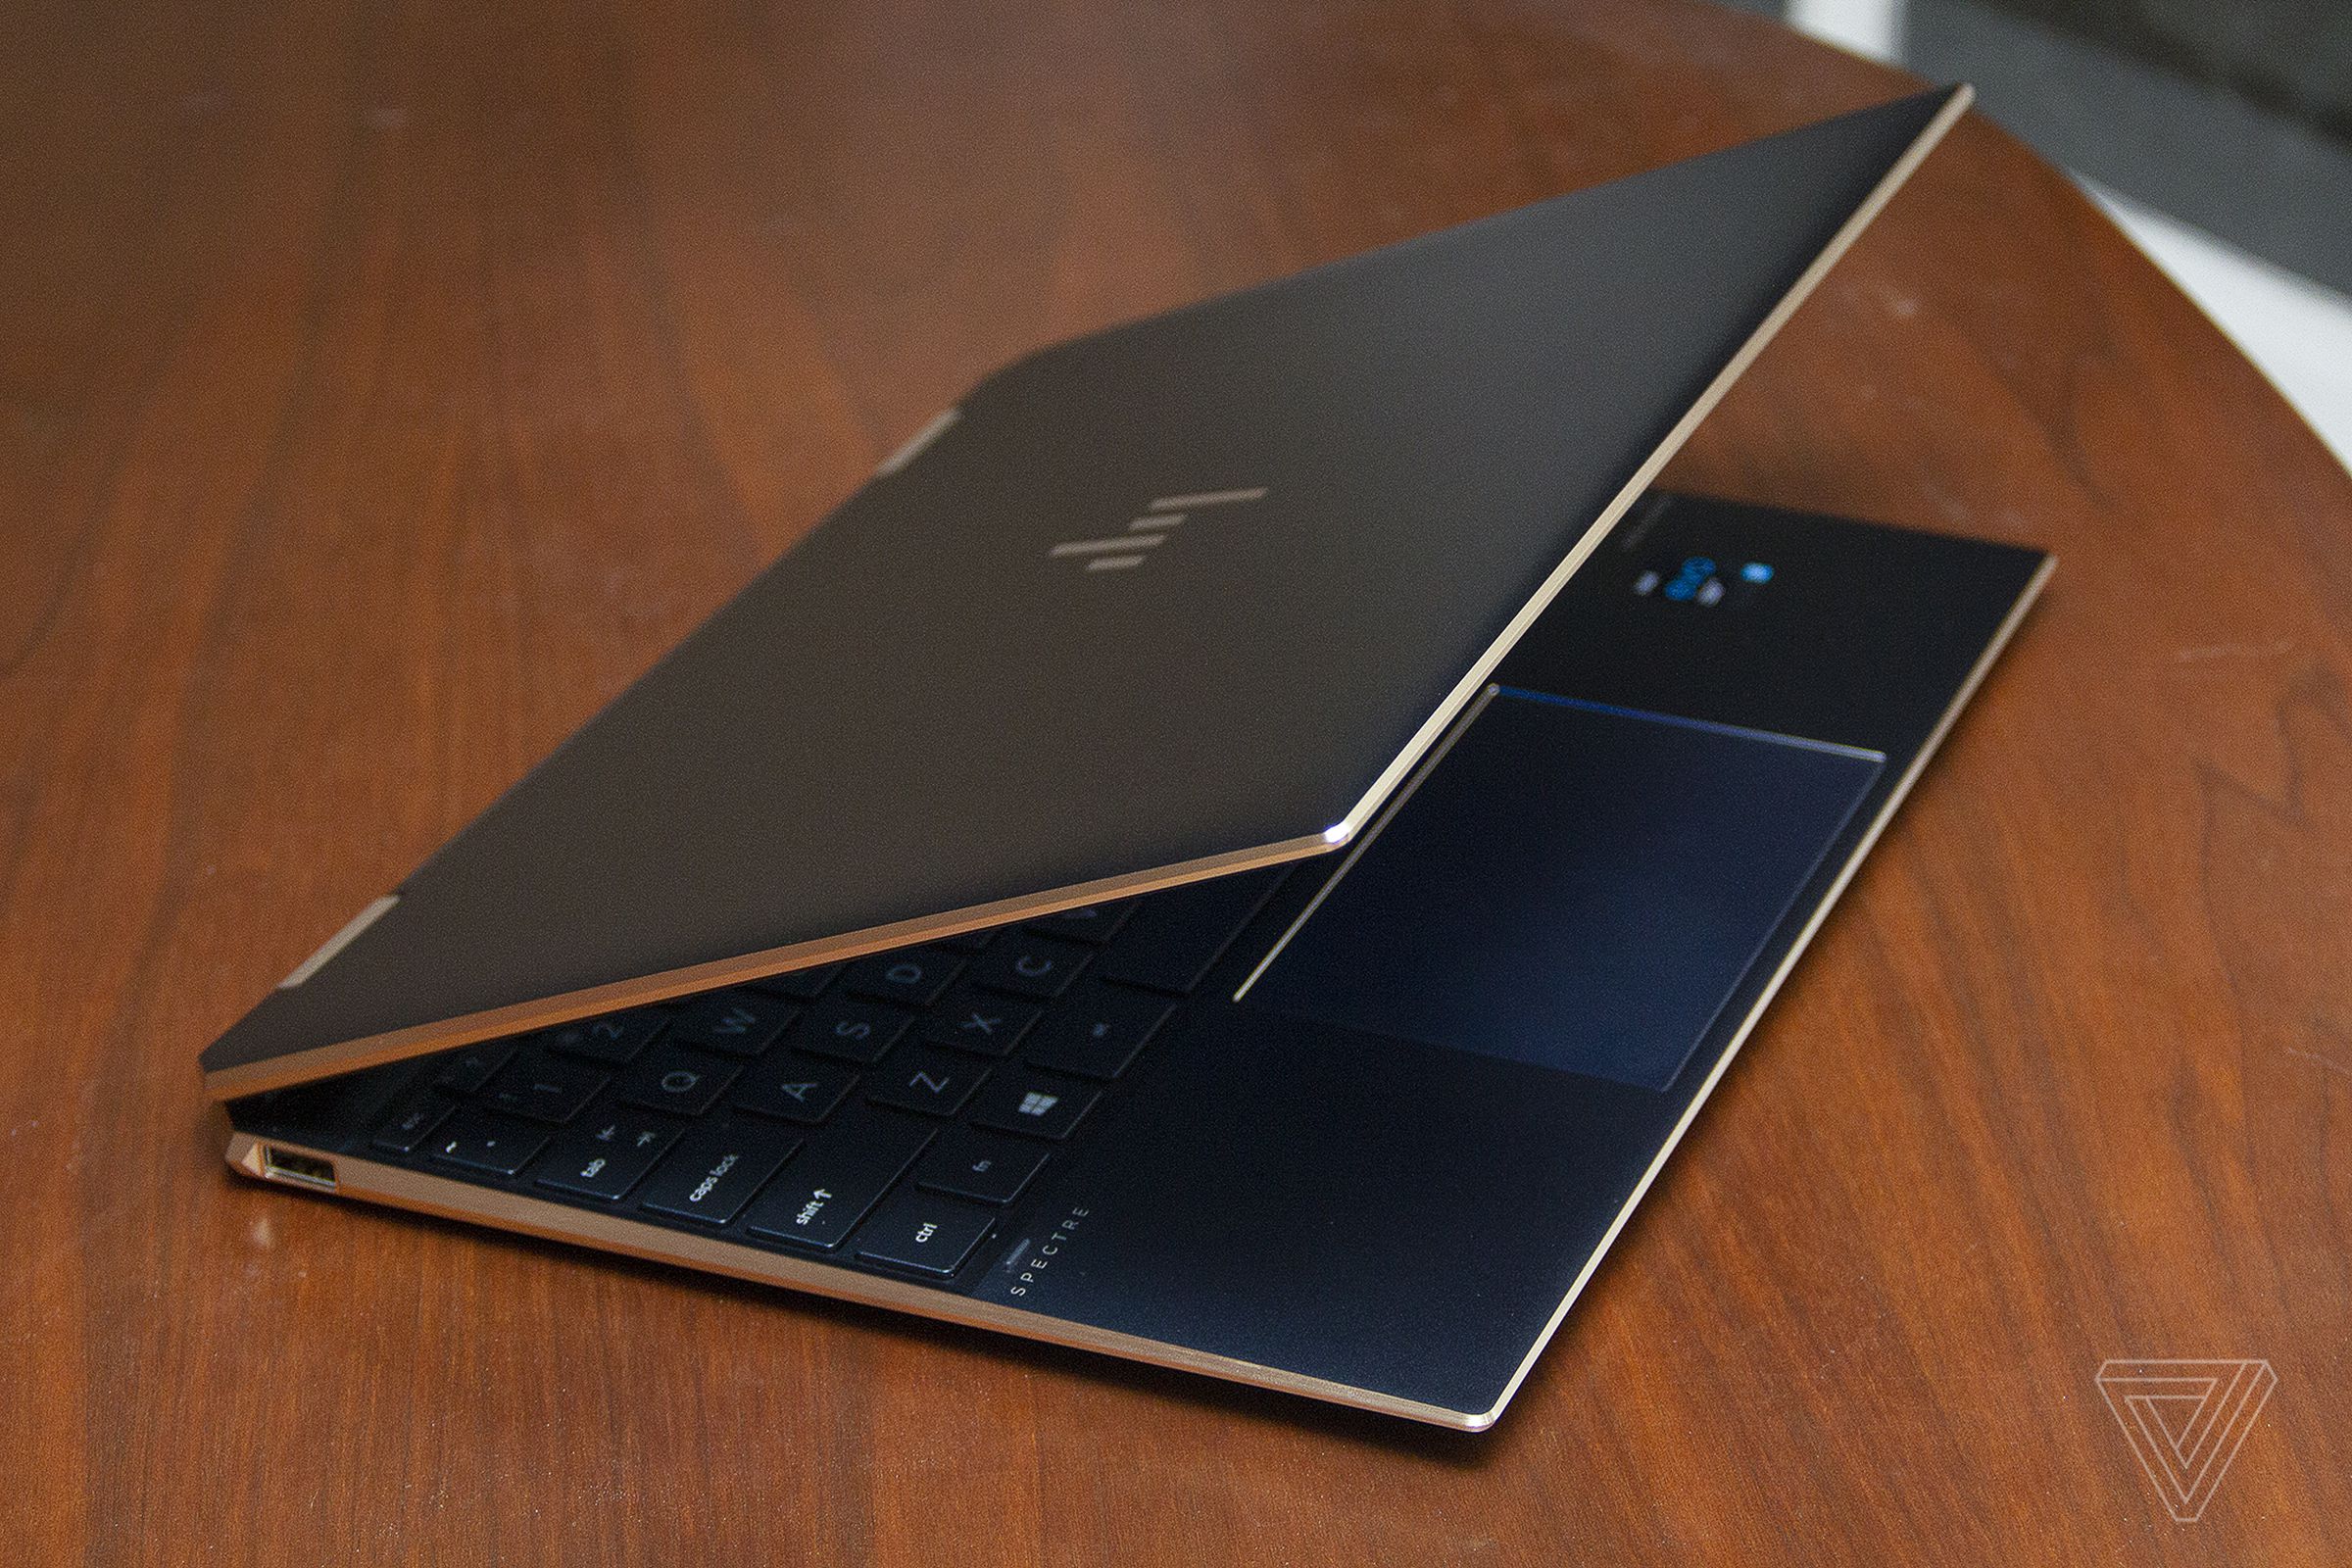 The HP Spectre x360 angled to the right, seen from above, with the lid half closed.